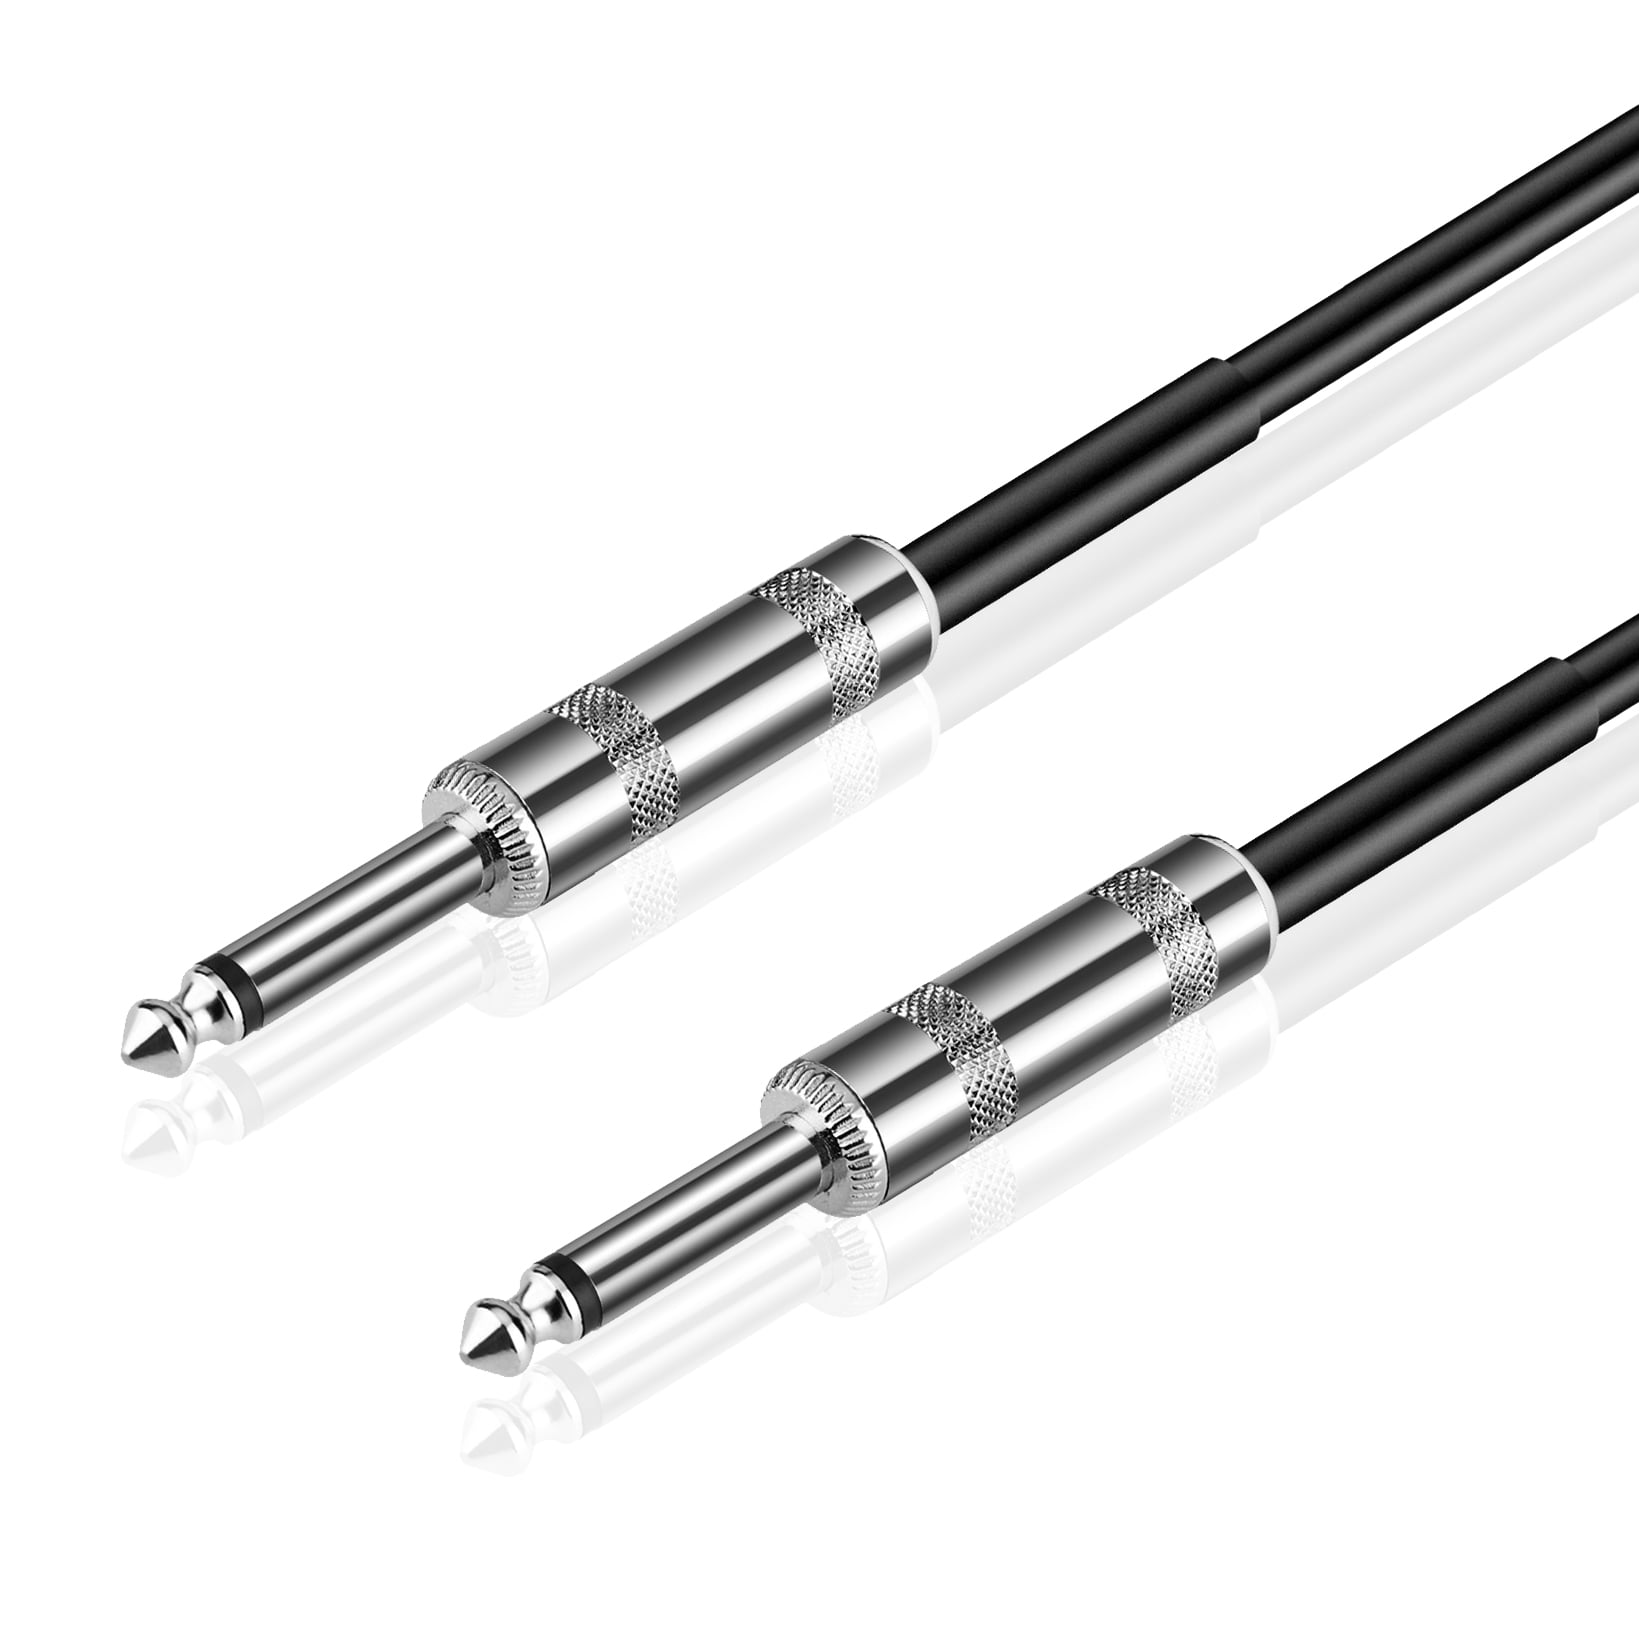 HiFi Audio Cable Mono 6.35mm 1/4 to 6.35mm 1/4 Jack Male to Male Electronic Cable Lead for Guitar Mixer Amplifier Bass Microphone 3m